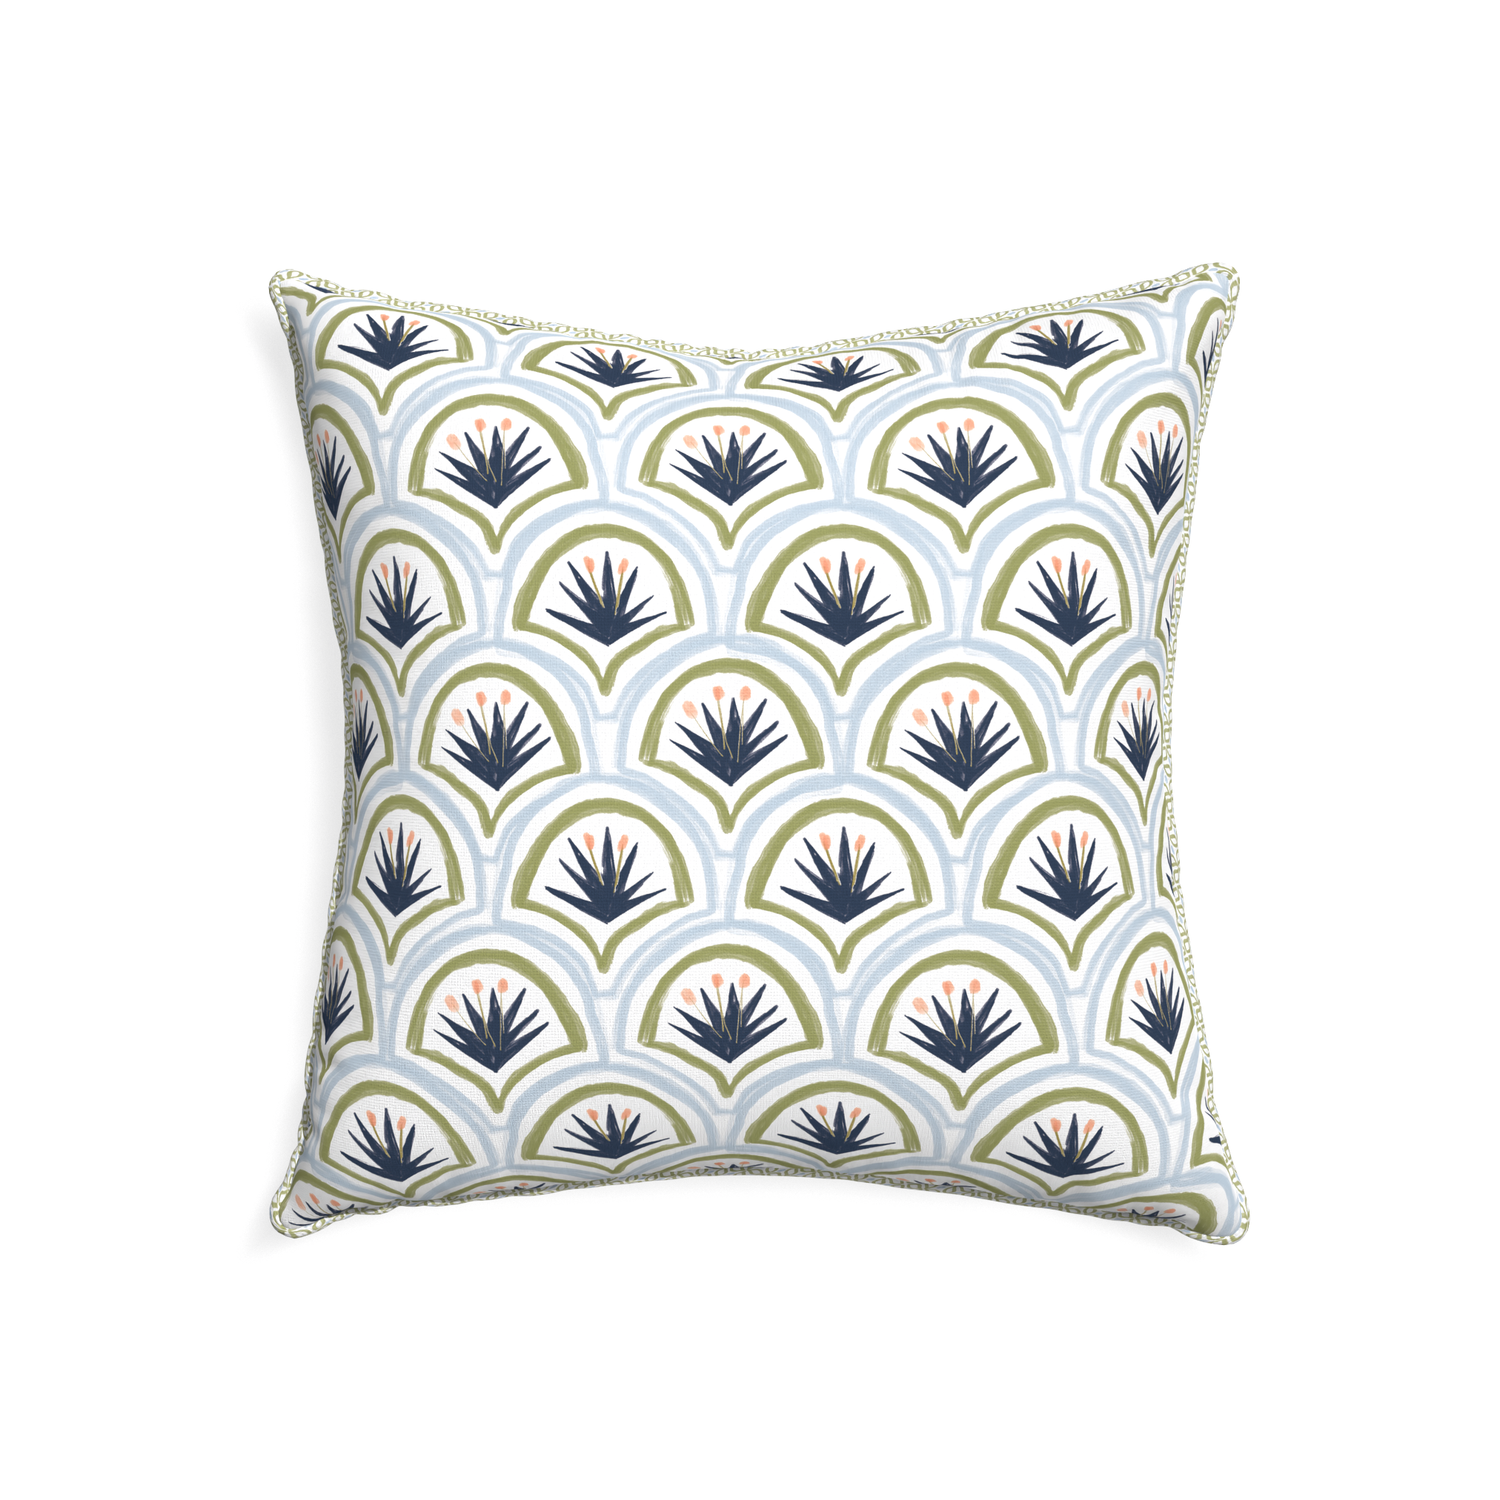 22-square thatcher midnight custom art deco palm patternpillow with l piping on white background